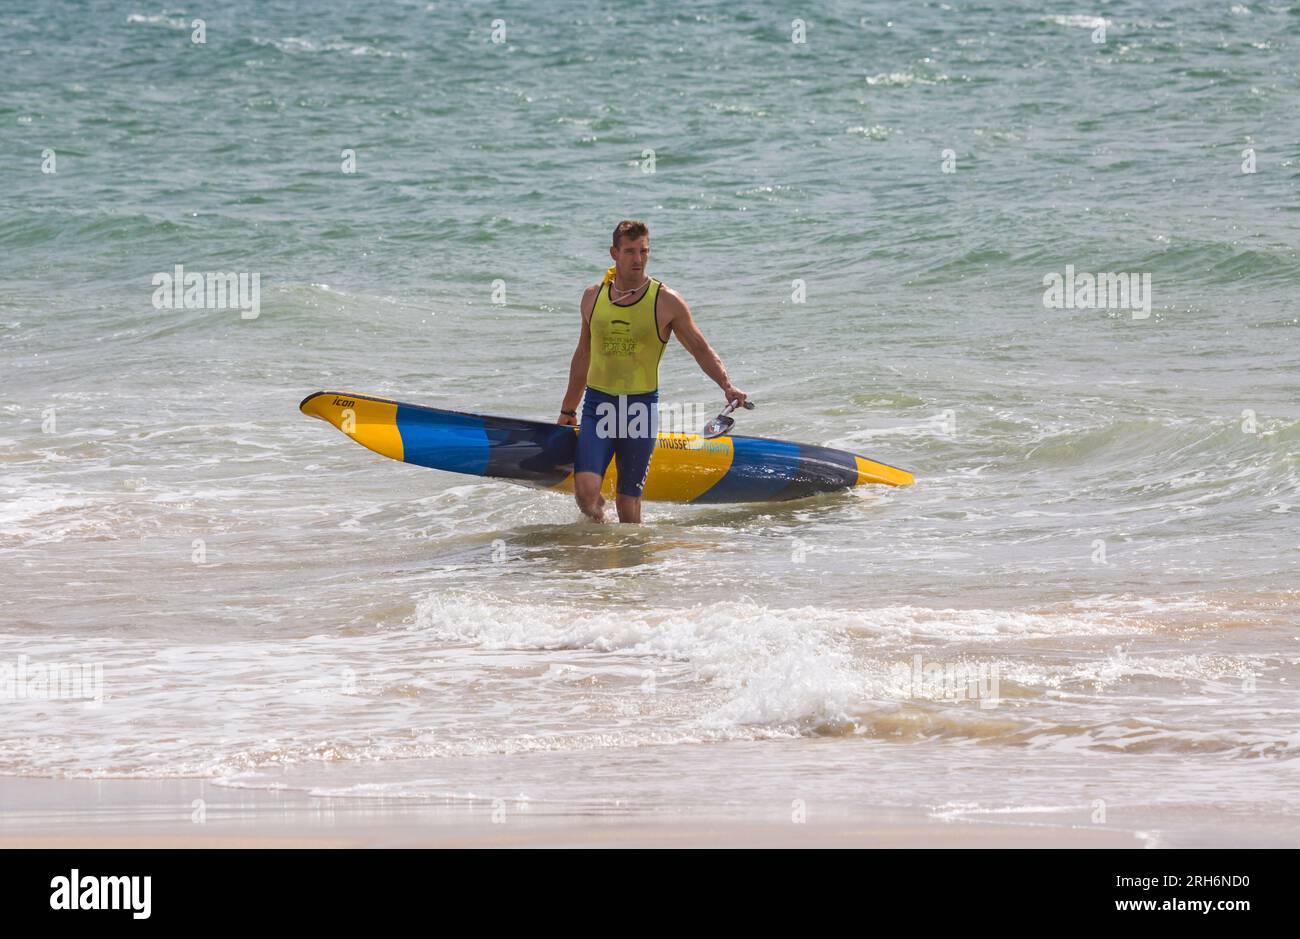 Man carrying surfski surf ski ready up the beach at Branksome Chine beach, Poole, Dorset, UK in August Stock Photo